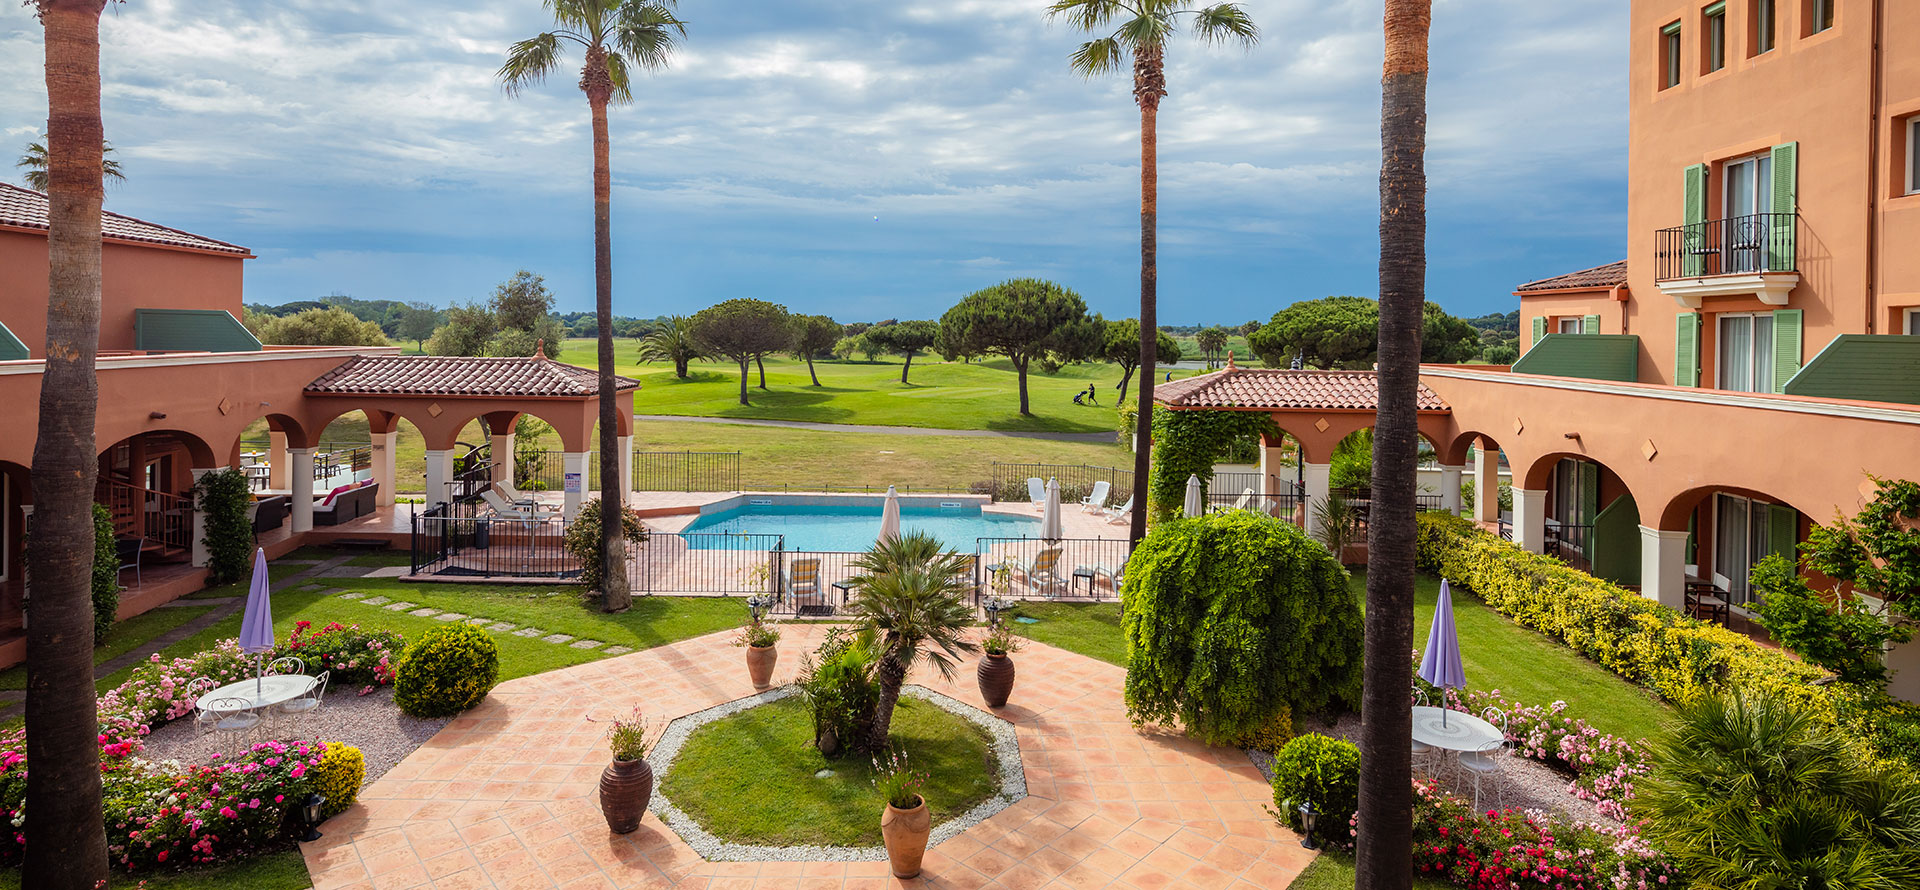 View from the room's private terrace Golf view of Palmyra Golf, swimming pool, golf course and garden. Palmyra Golf 4-star hotel in Cap d'Agde